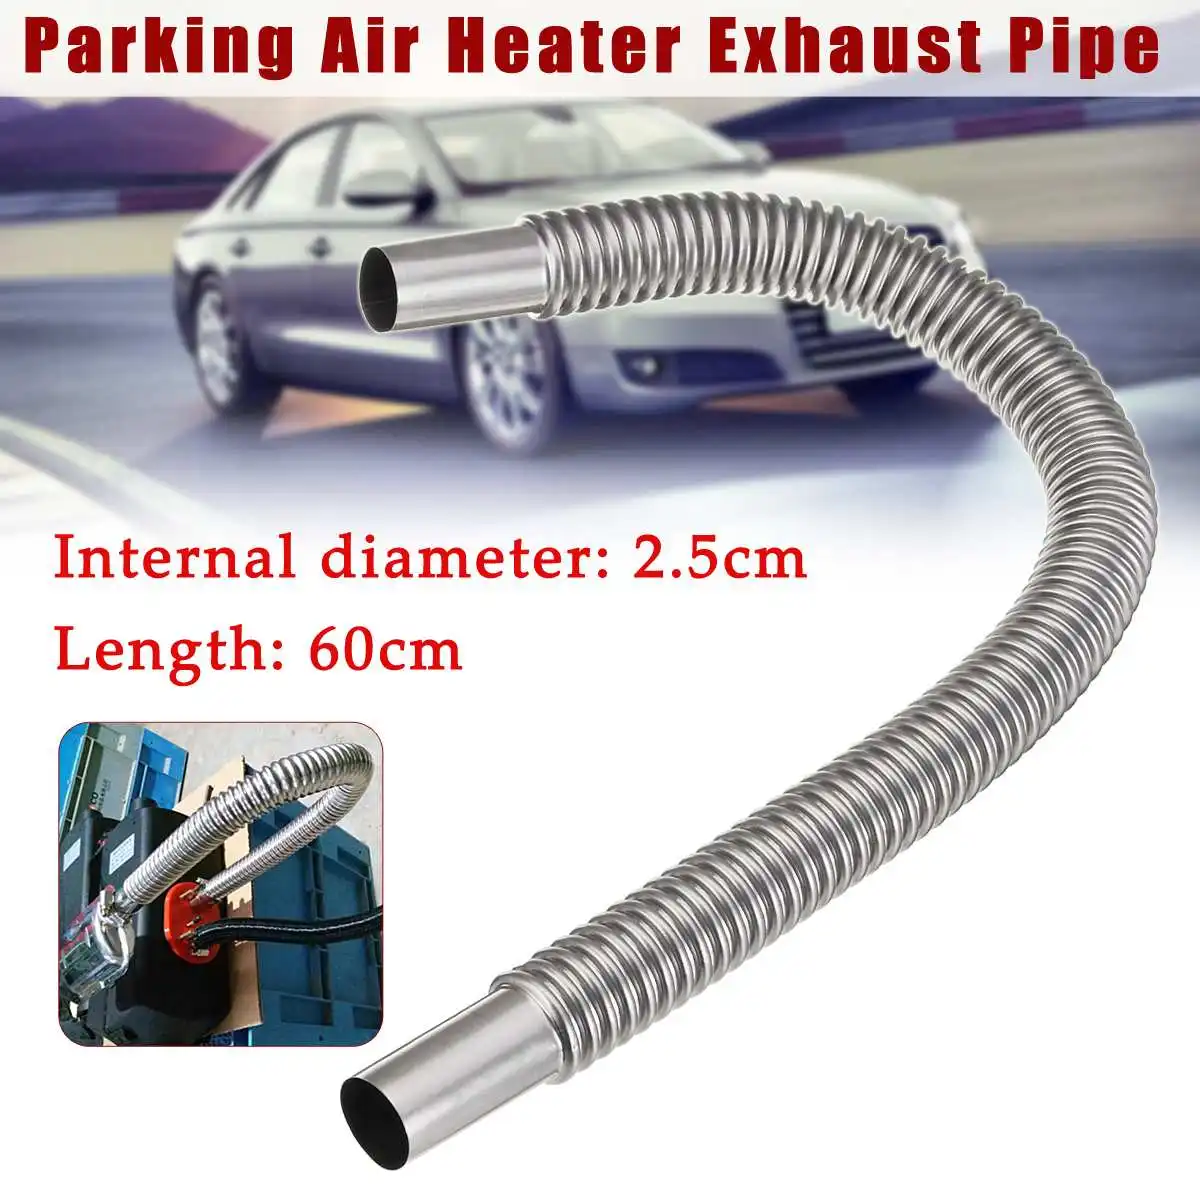 silver Round Diesel Gas Vent Hose for Parking Air Heater WSDF 60x2.5cm Stainless Steel Air Heater Tank Exhaust Pipe for Auto Car Truck Boat 